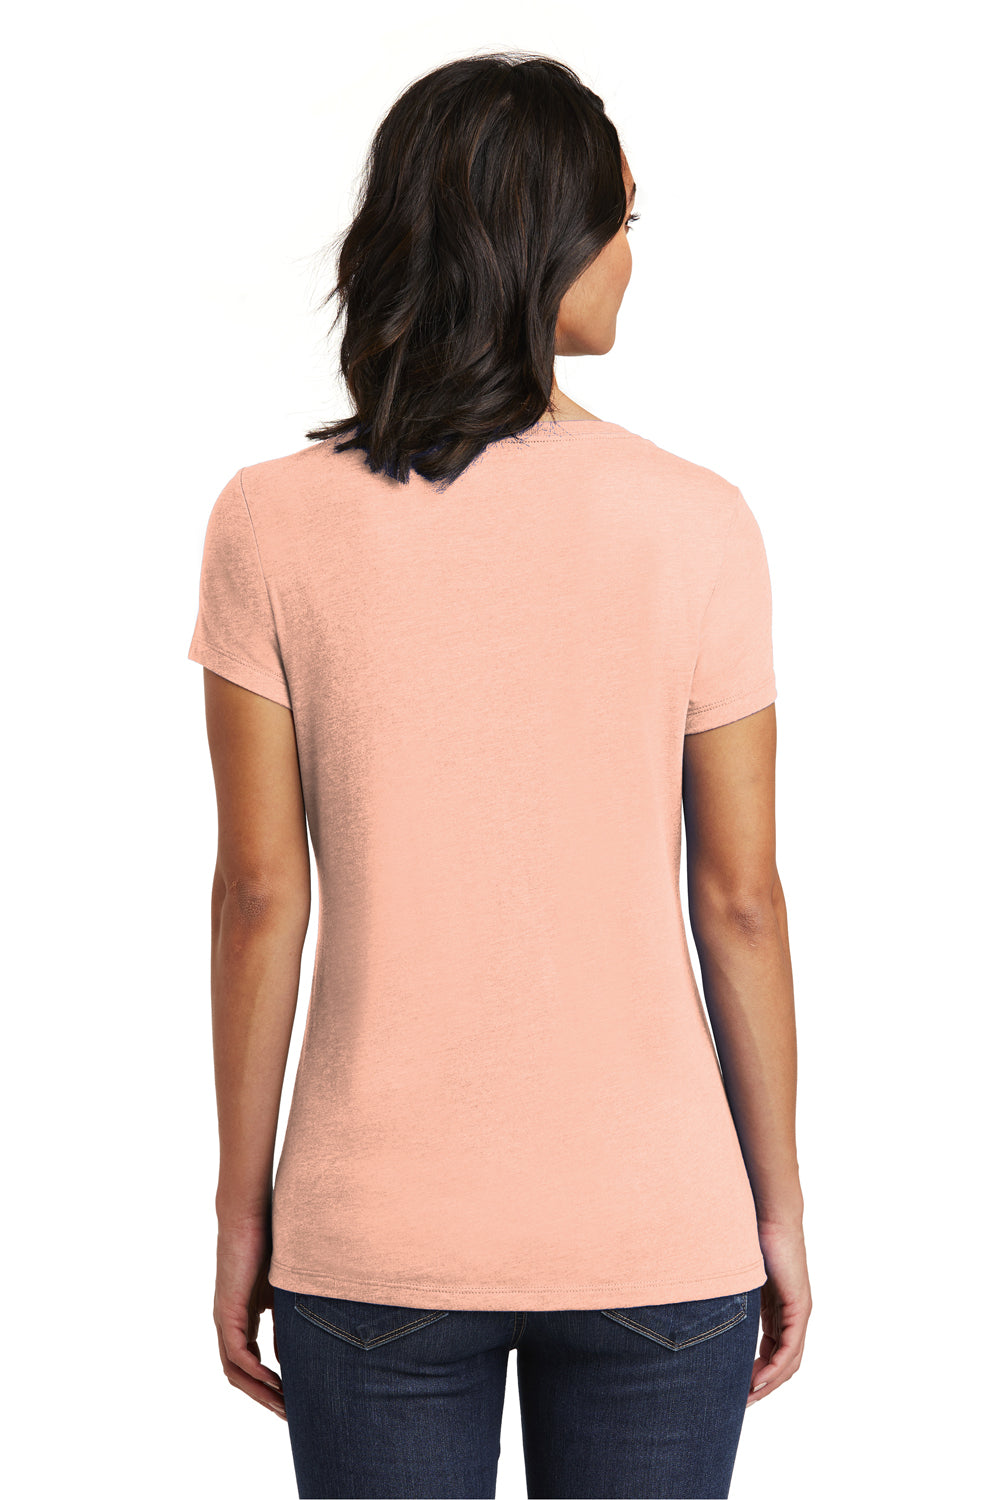 District DT6503 Womens Very Important Short Sleeve V-Neck T-Shirt Dusty Peach Back